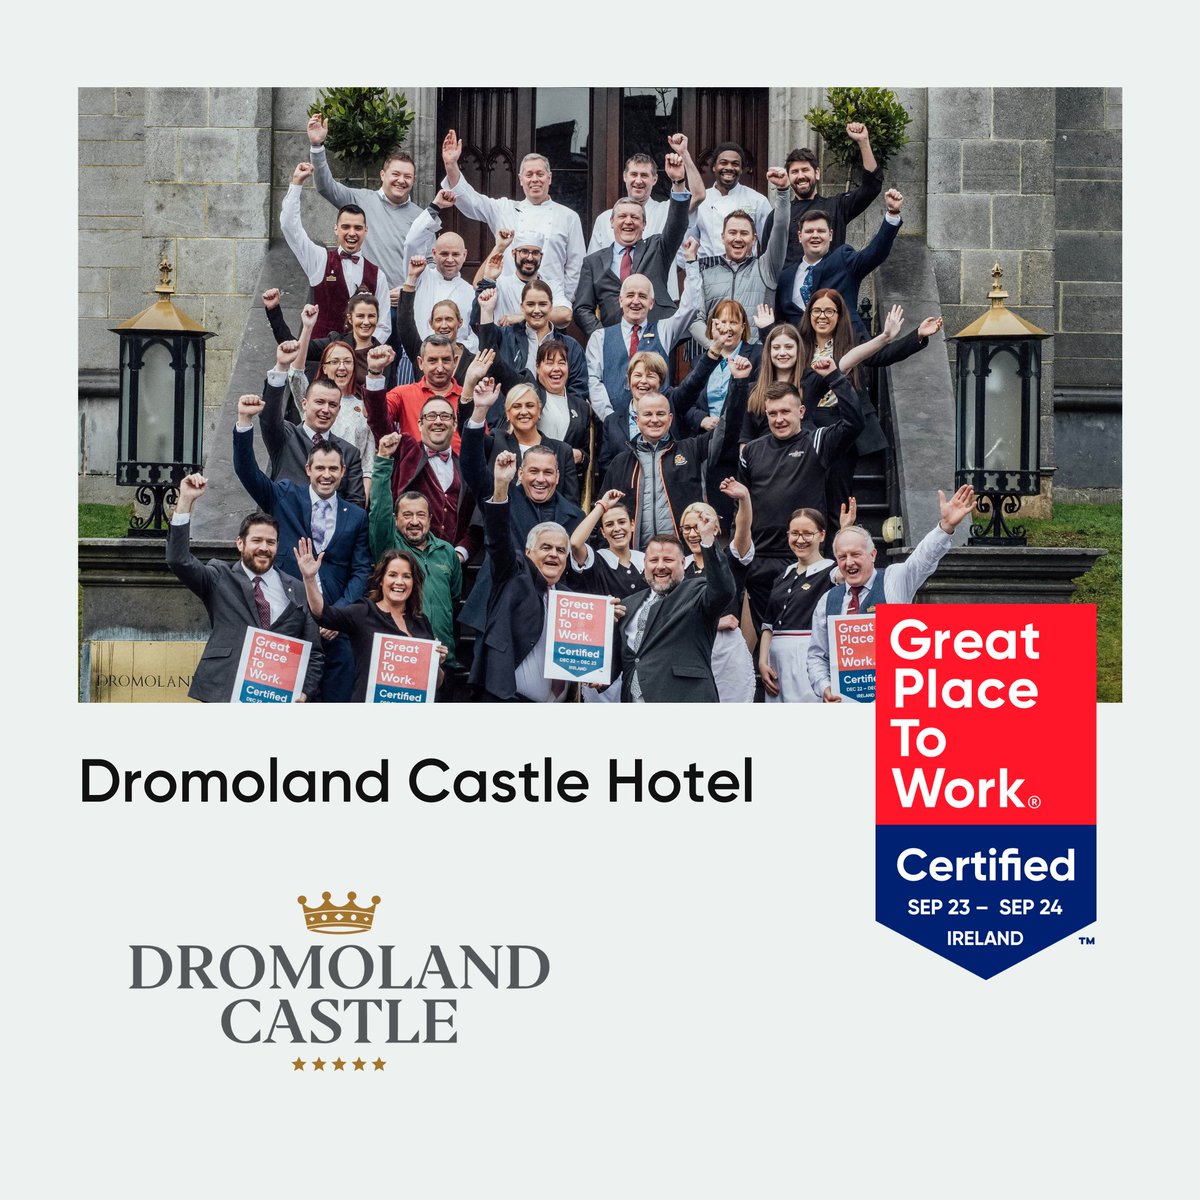 CERTIFICATION 🏅| Well done to Dromoland Castle Hotel (@DromolandCastle) for being Certified™ as a #greatplacetowork again! Congratulations to the team for this fantastic achievement! Check out their great culture 👉 hubs.ly/Q0235JVy0 #gptw #greatplacetowork